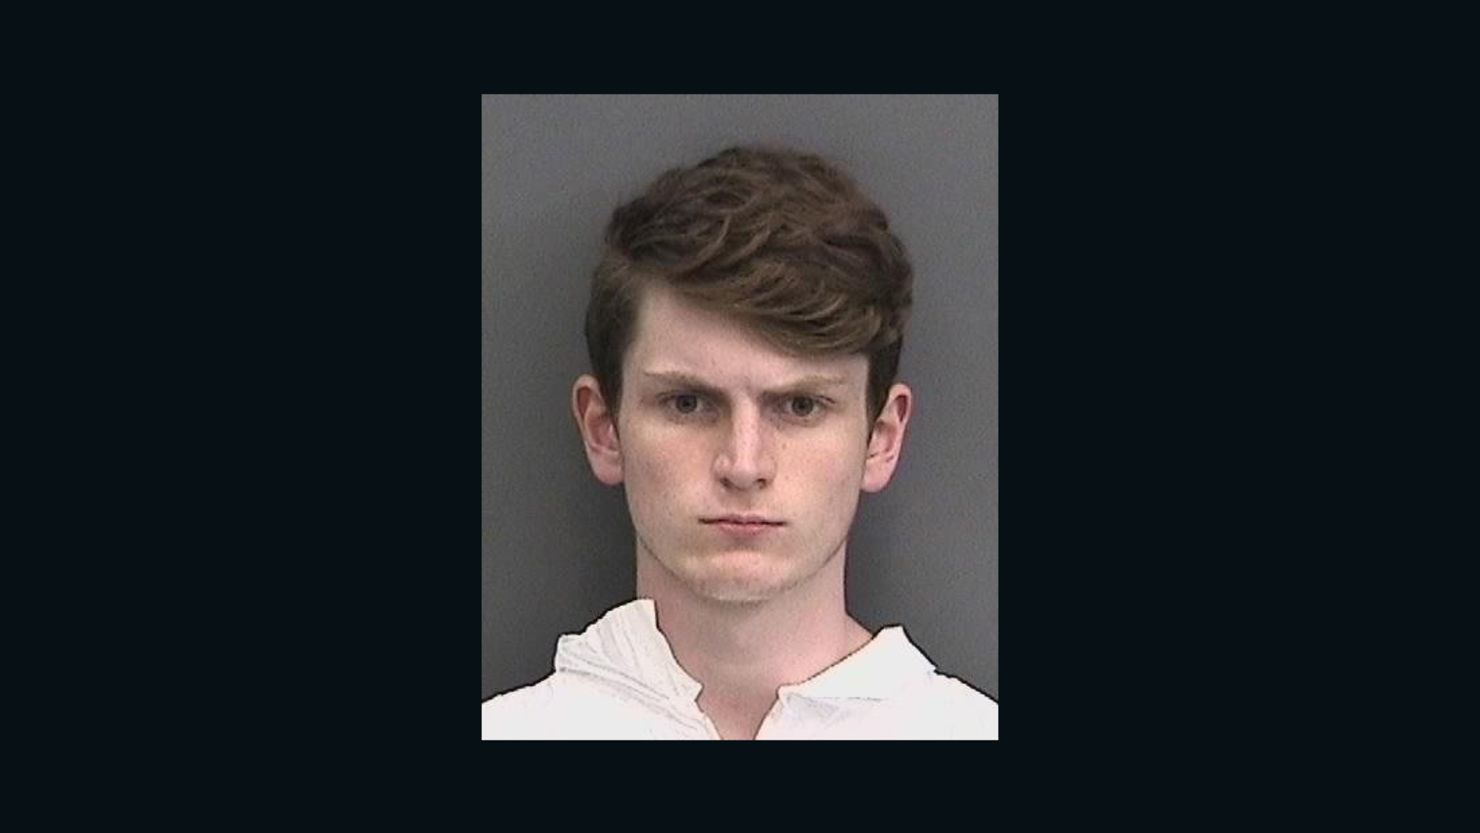 Devon Arthurs, who claimed two of his roommates were neo-Nazis who disrespected his conversion to Islam.